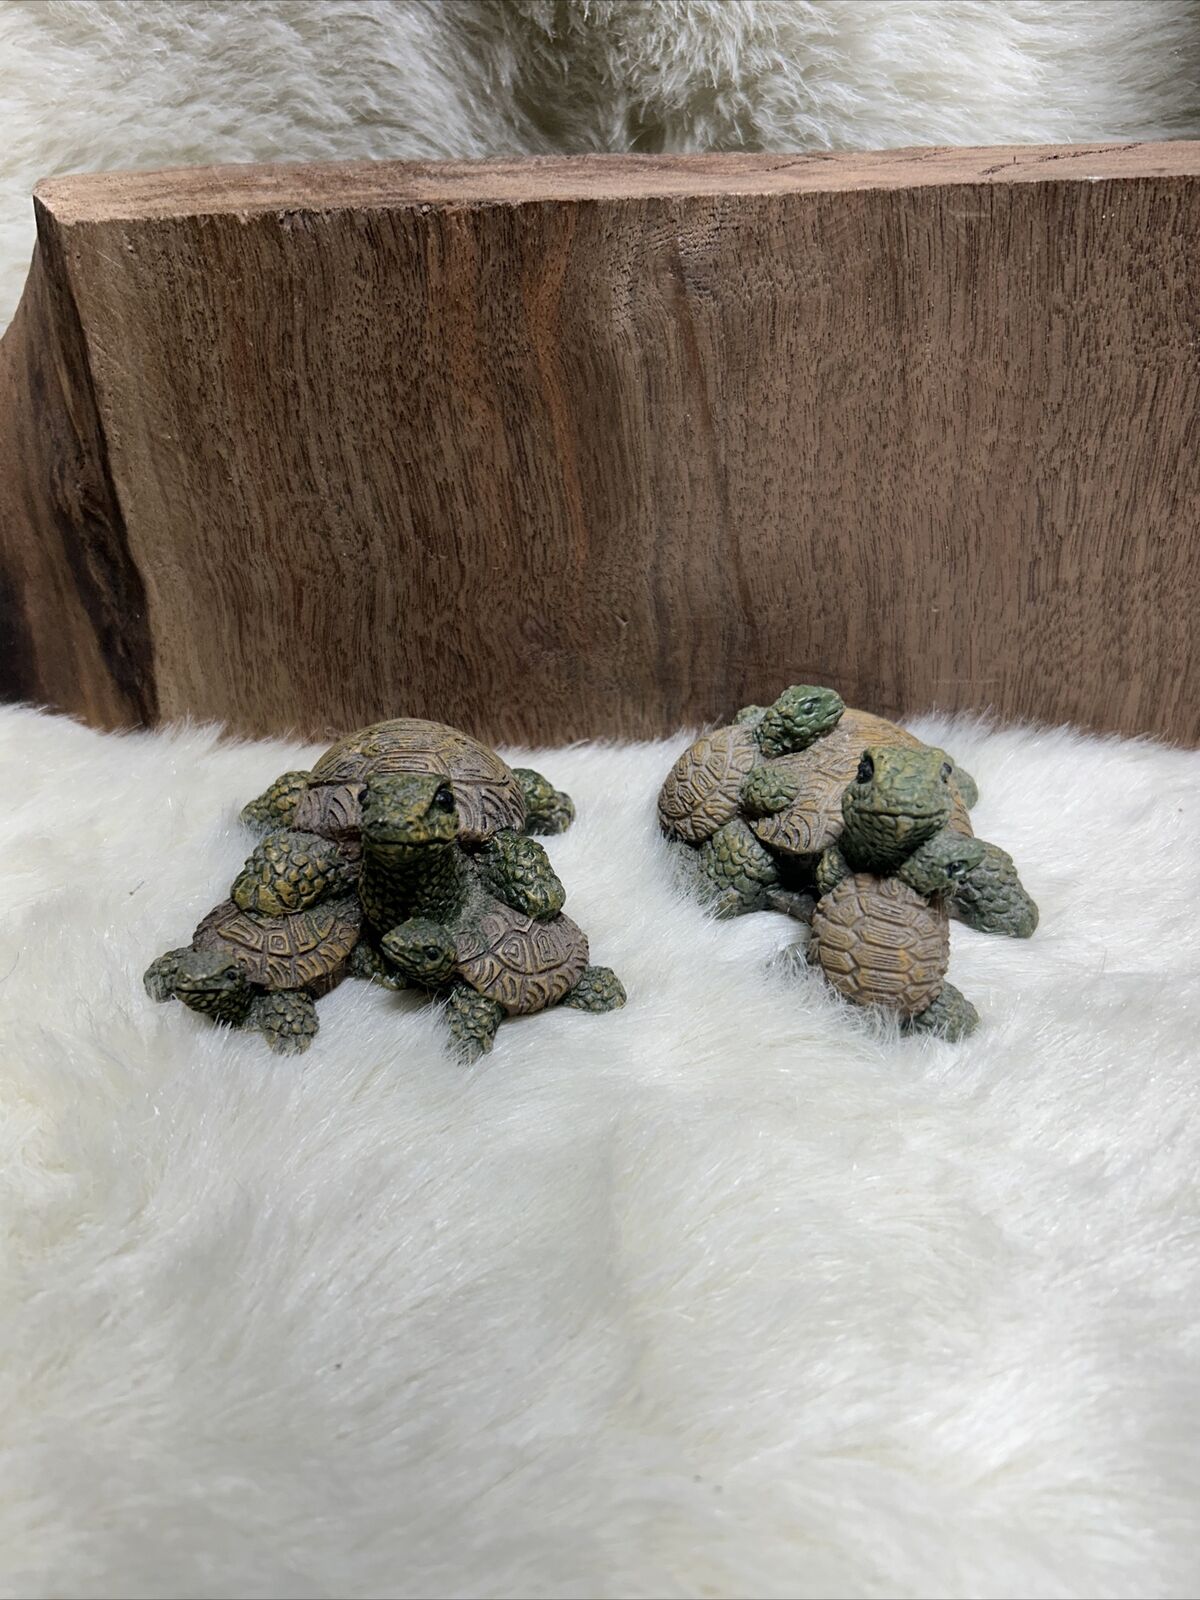 Two Adorable Resin Turtle Figurines Family Smile